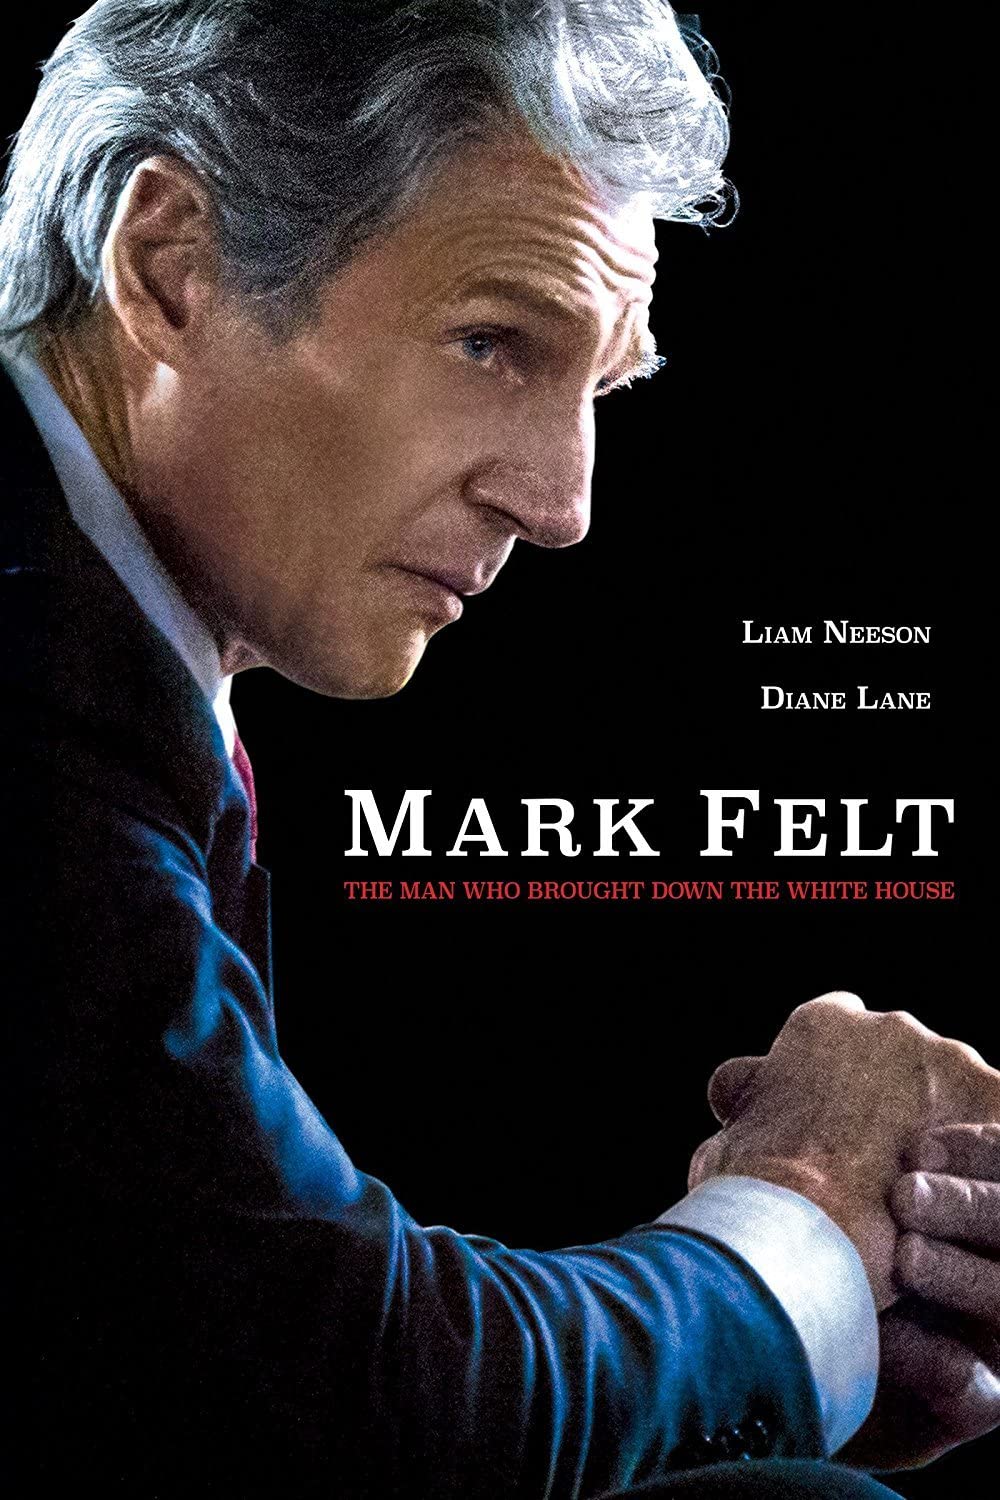 MARK FELT: MAN WHO BROUGHT DOWN THE WHITE HOUSE - MARK FELT: MAN WHO BROUGHT DOWN THE WHITE HOUSE (1 DVD)